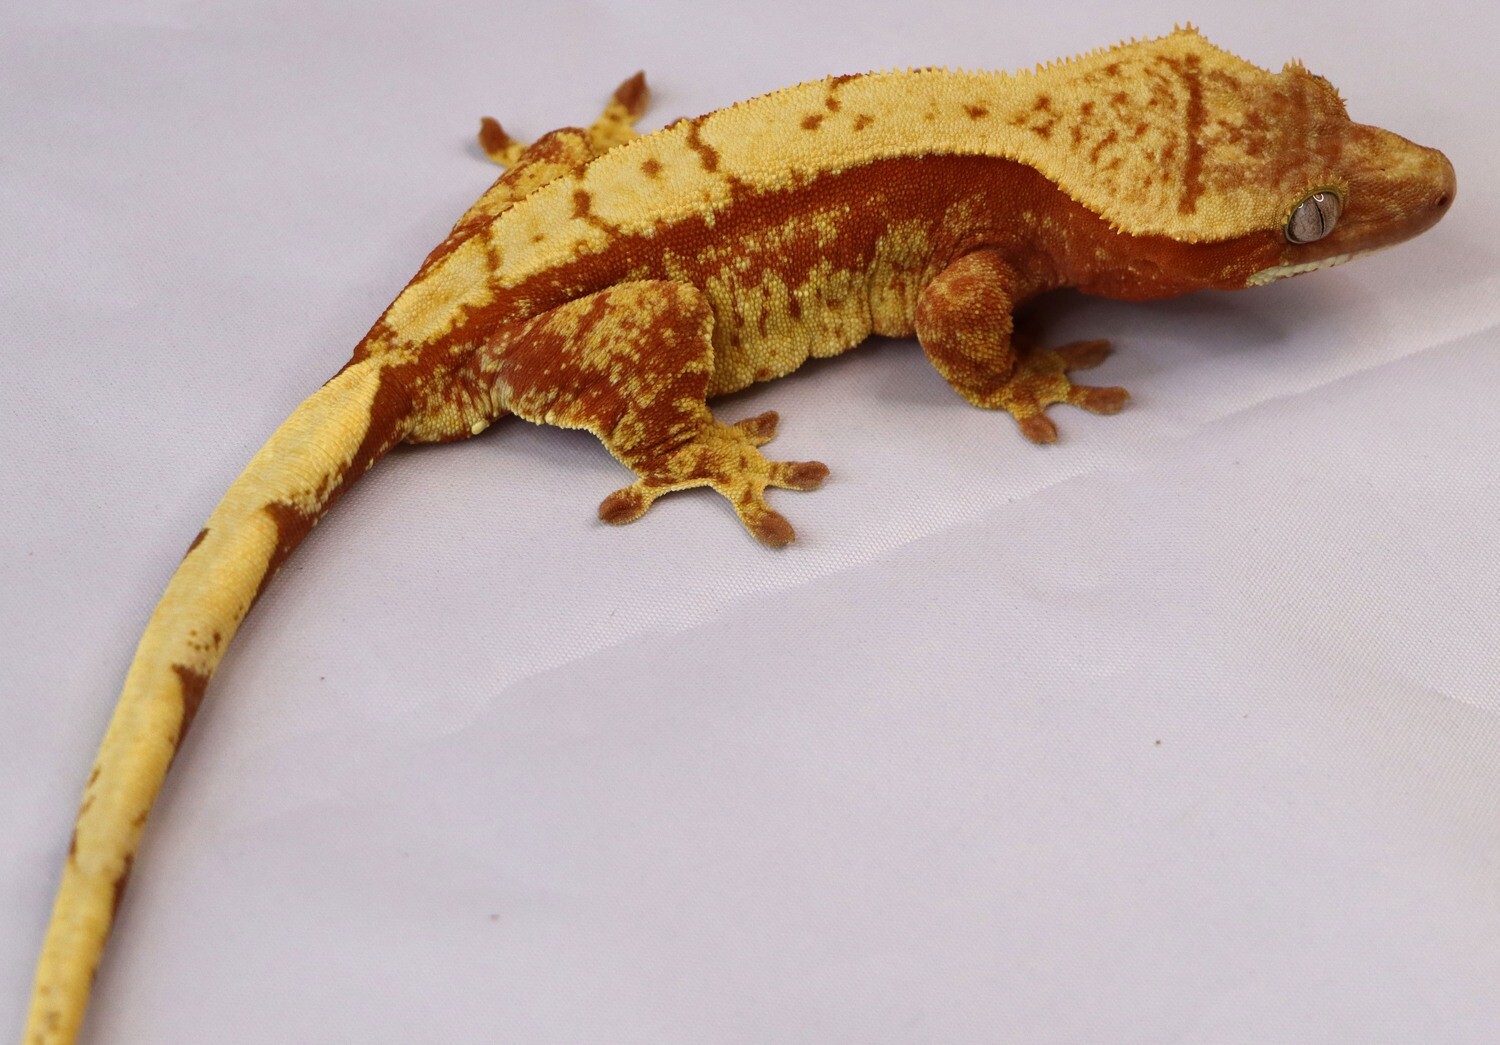 READY TO BREED INSANE RED SCORCH - Harlequin [Female] [UE126] Crested Gecko Correlophus Ciliatus